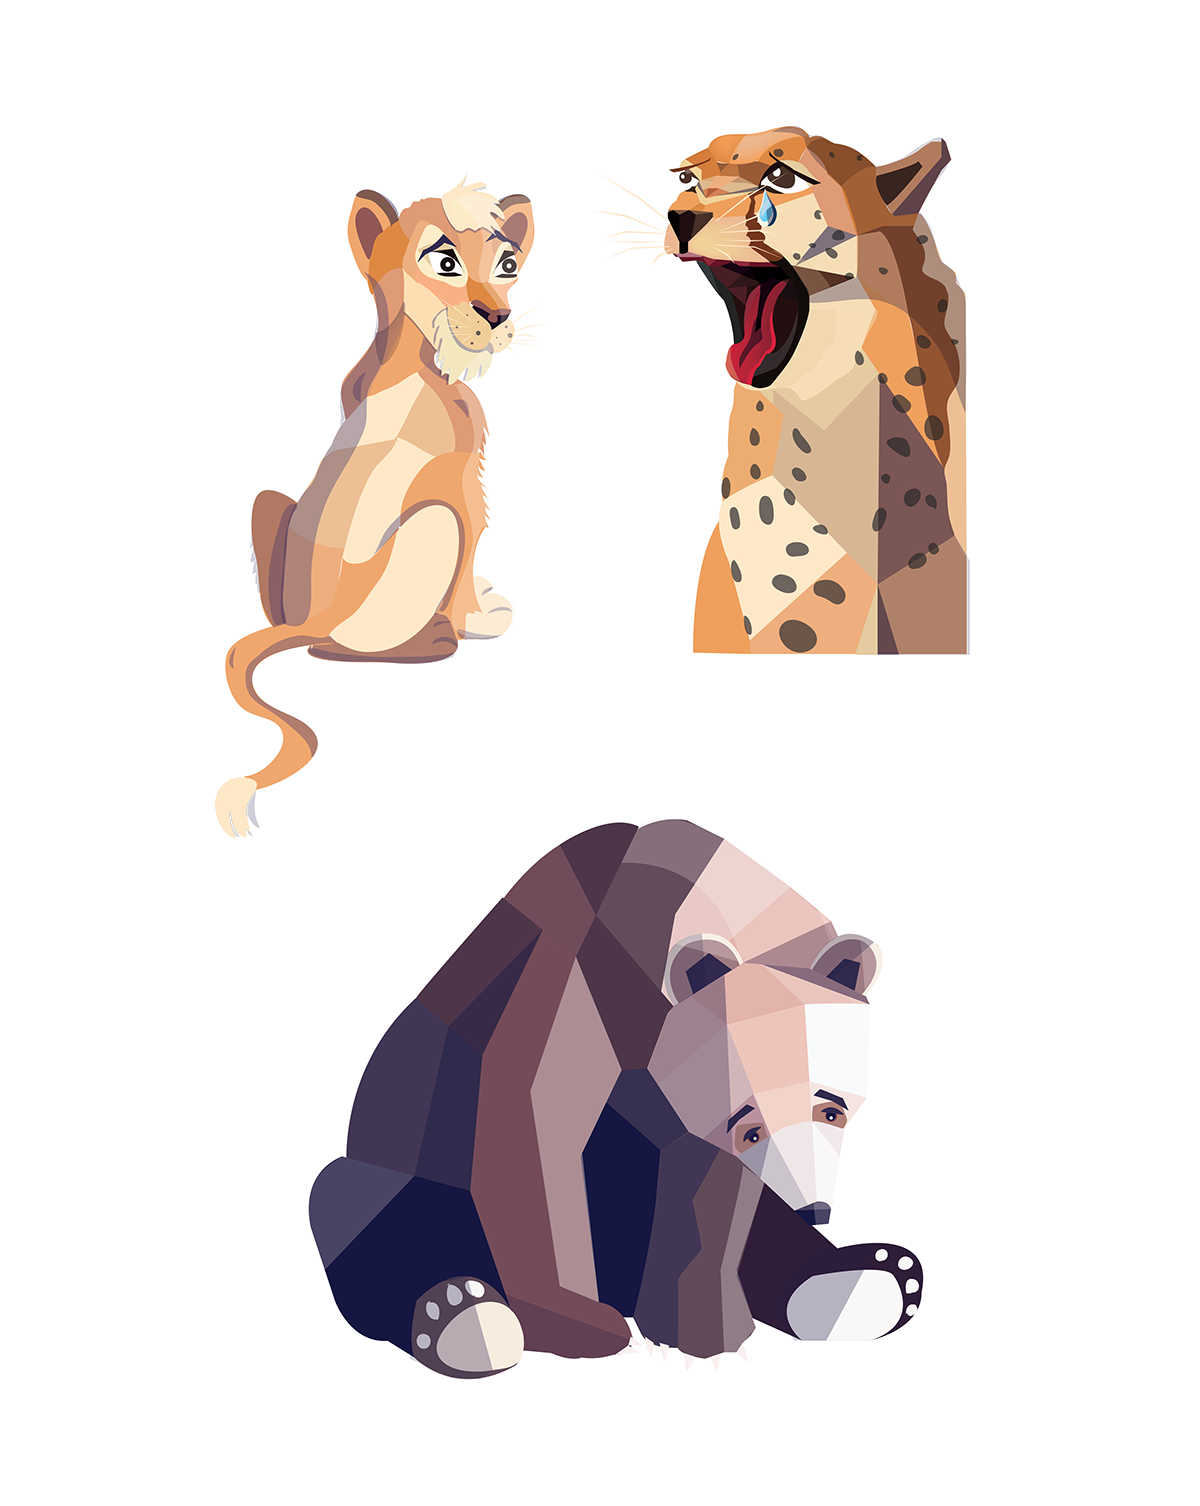 thesis animals illustrations zoo tiger lion monkey cheetah cute cubistic polygonal jungle